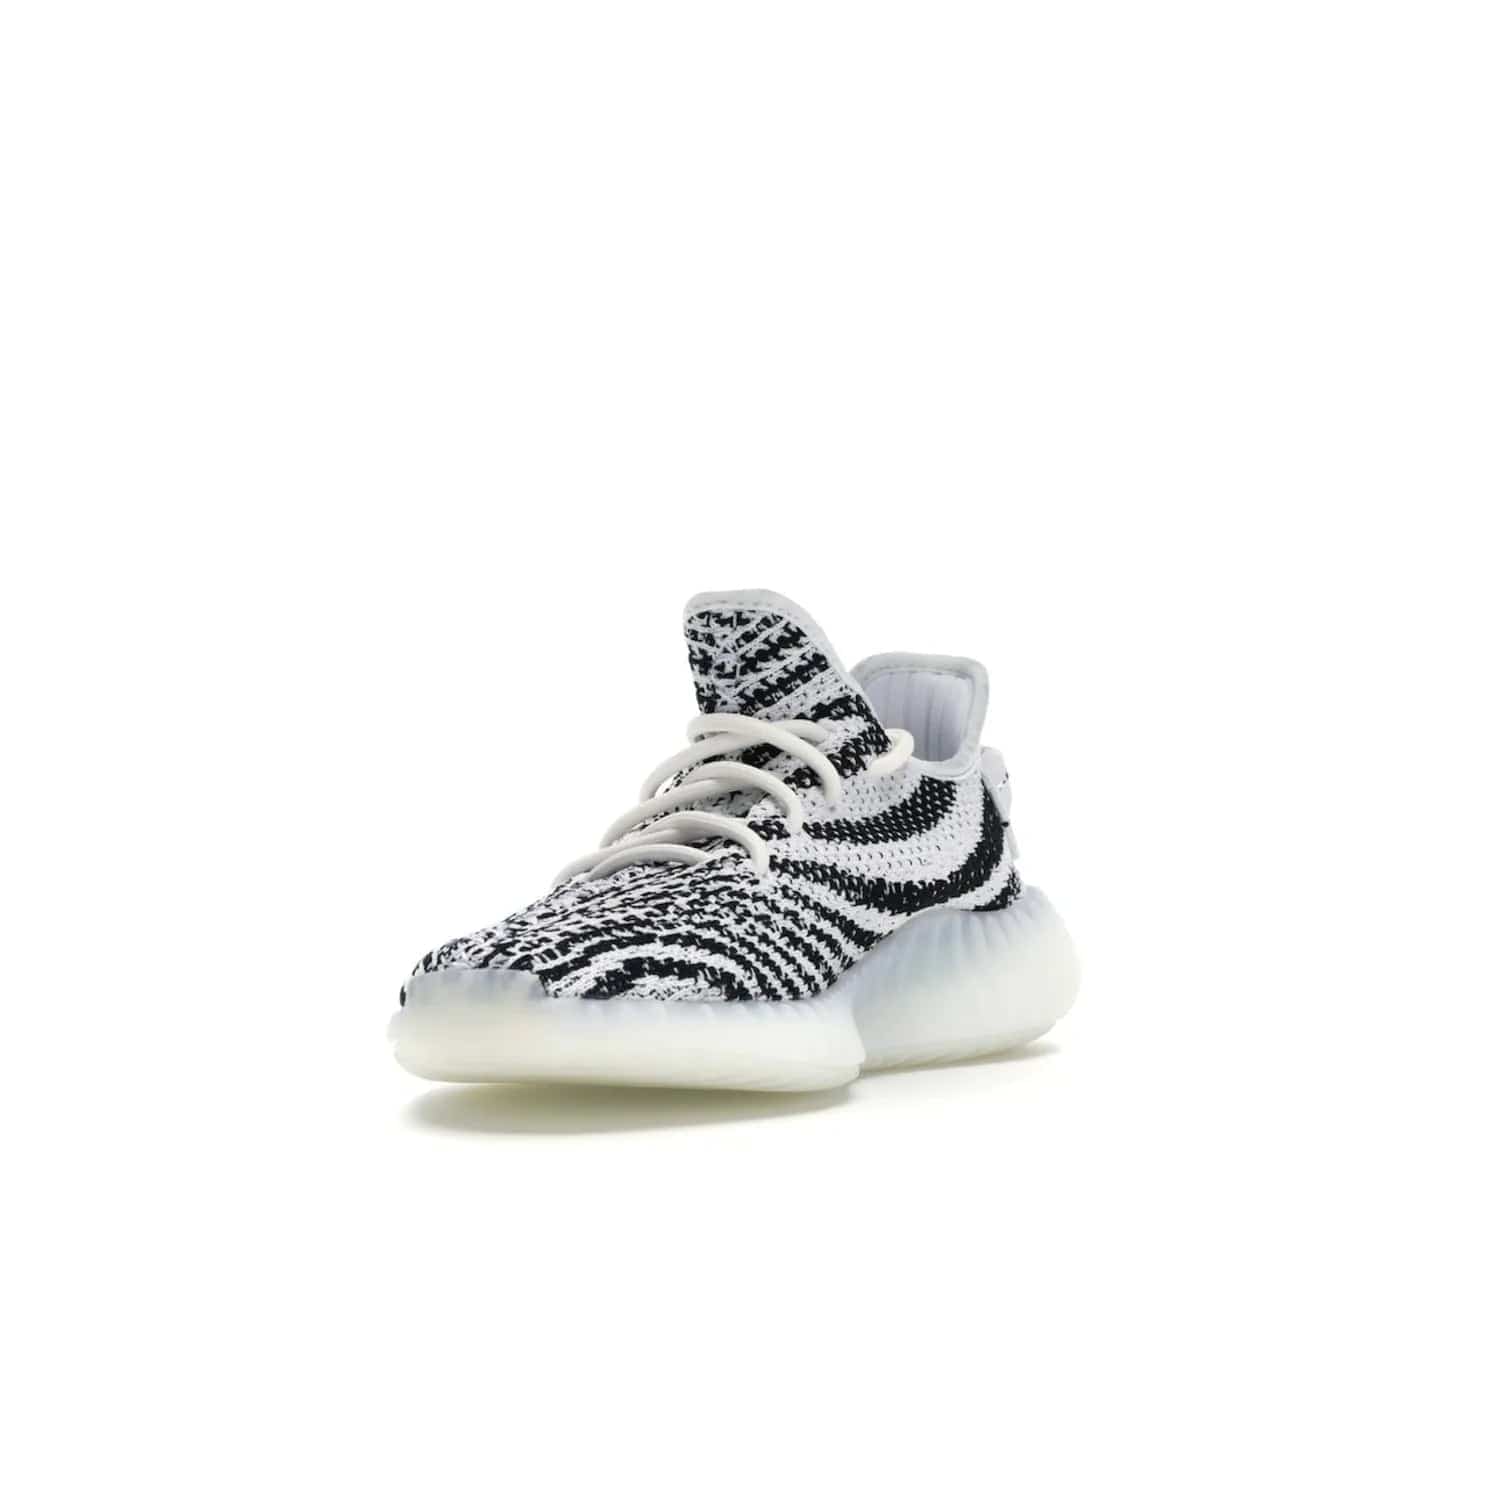 adidas Yeezy Boost 350 V2 Zebra - Image 13 - Only at www.BallersClubKickz.com - #
Score the iconic adidas Yeezy Boost 350 V2 Zebra for a fashionable addition to your street-style. Featuring a Primeknit upper and Boost sole, you'll look great and feel comfortable with every step.